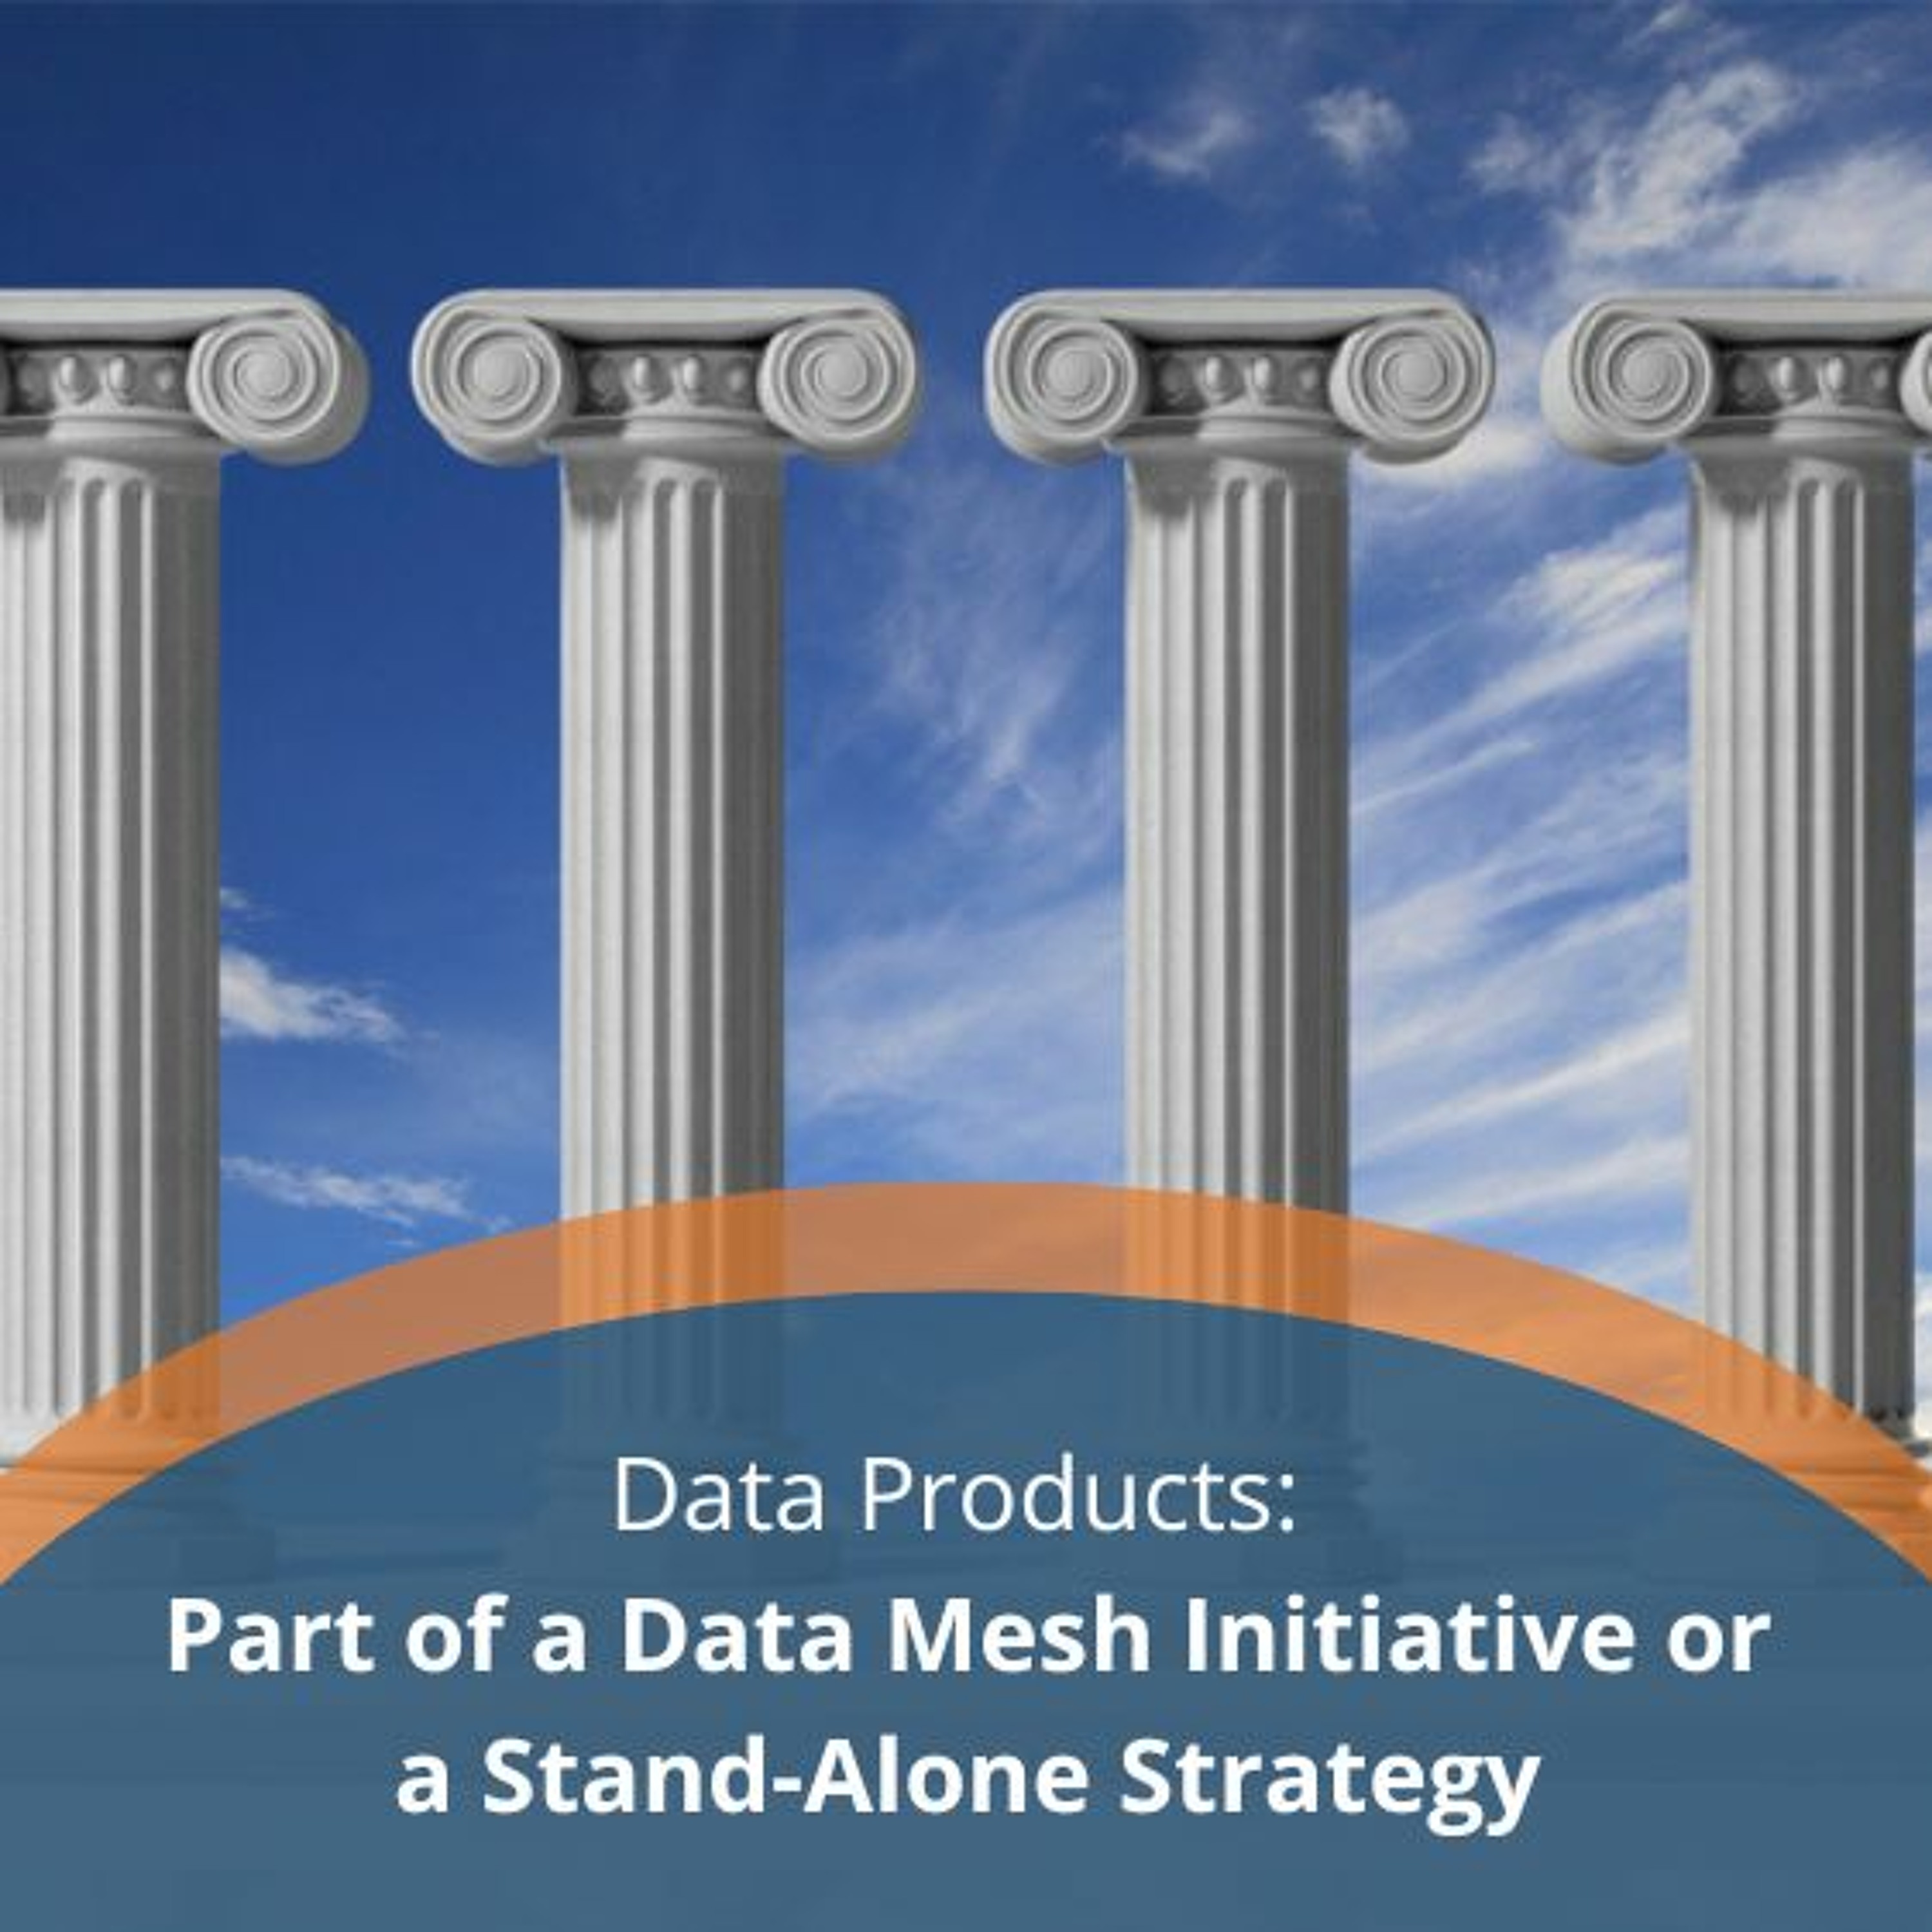 Data Products: Part of a Data Mesh Initiative or a Stand-Alone Strategy - Audio Blog